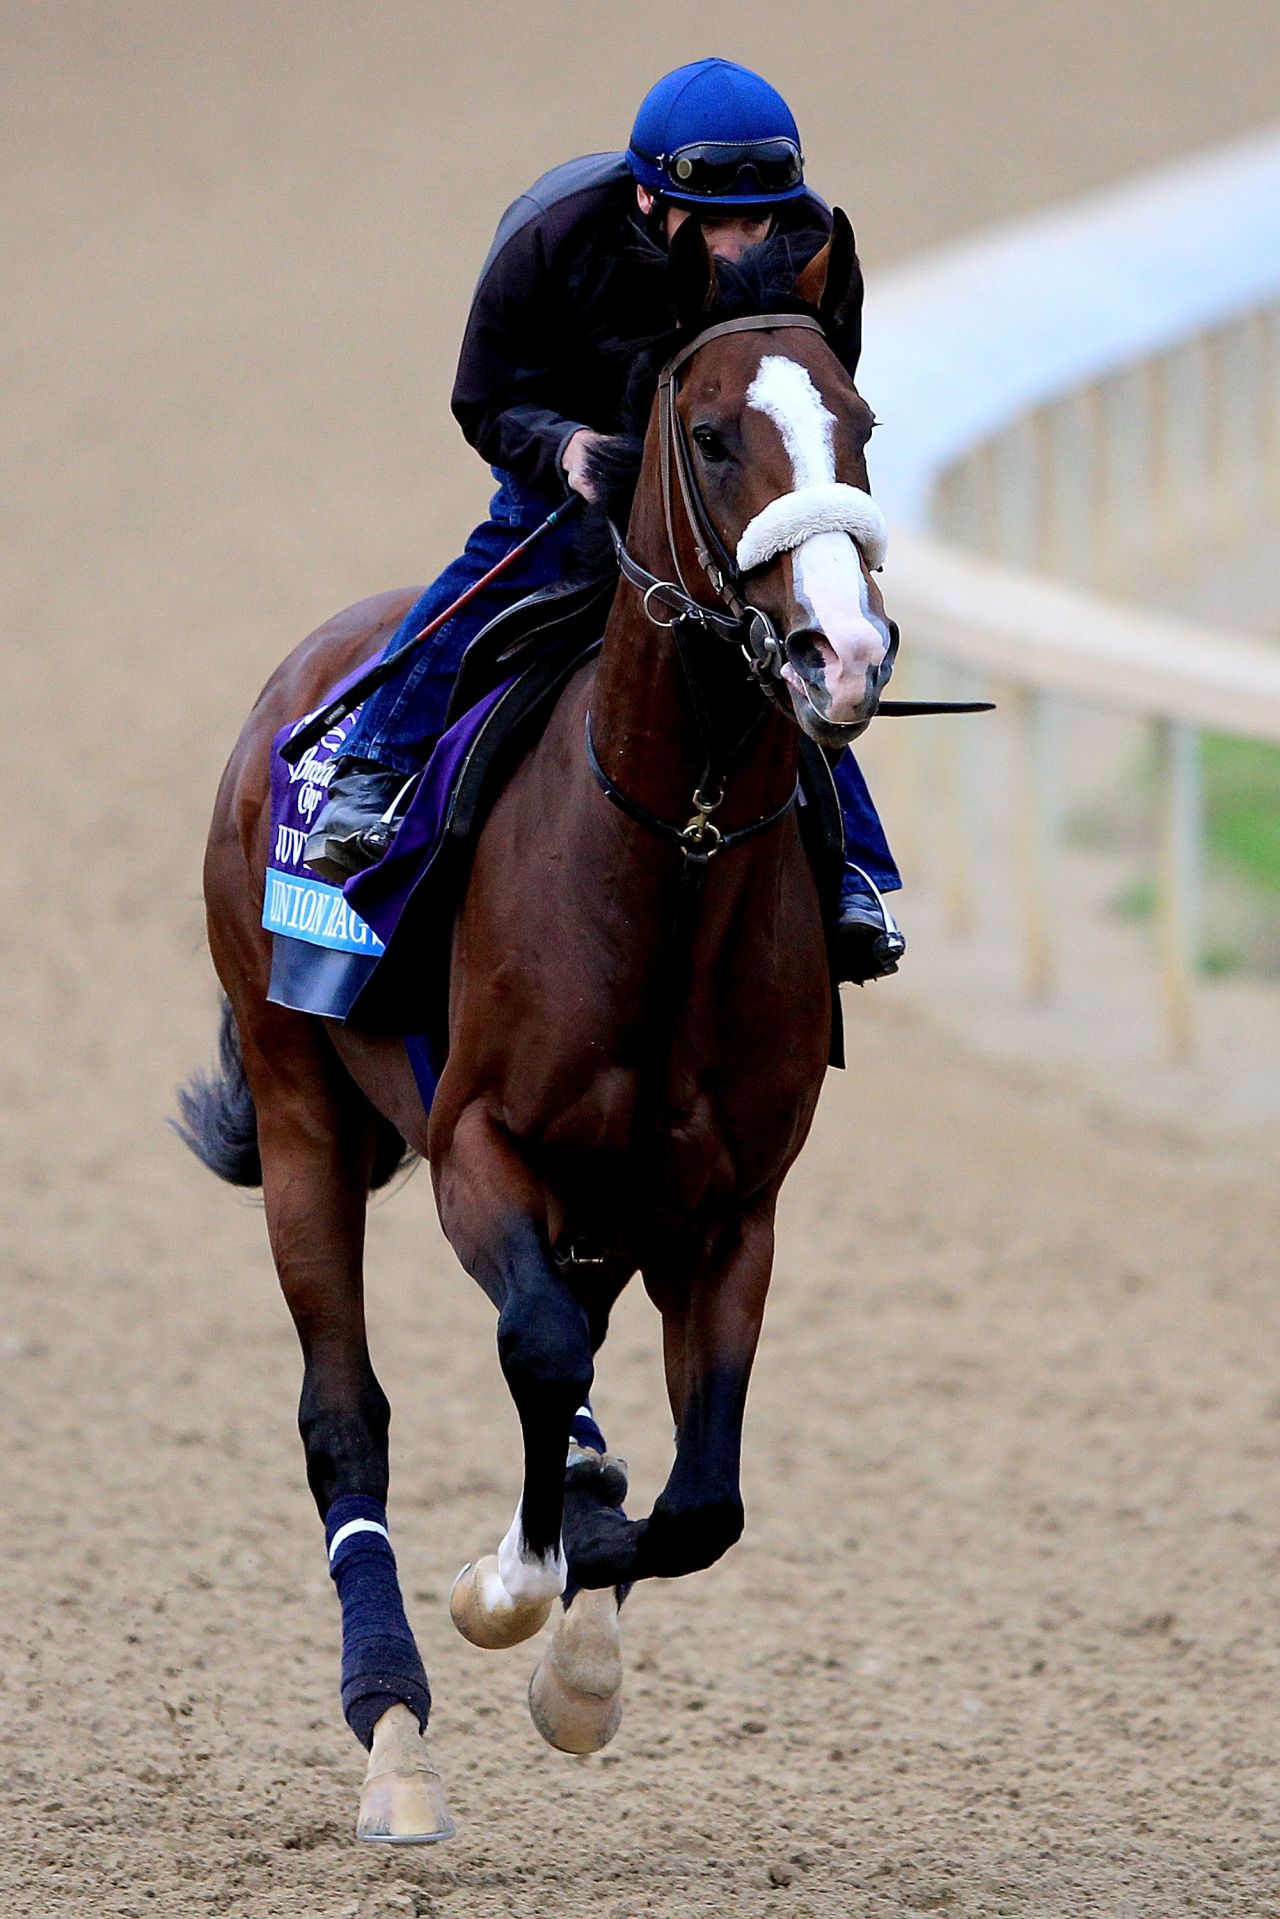 Union Rags has already had some success at Churchill Downs, finishing second in the Breeders' Cup Juvenile there in 2011. The colt was also third at the Florida Derby in March. "He's big, he's strong, he's fast -- so far I haven't found any faults in him. I think he's got a good chance," trainer Michael Matz said.